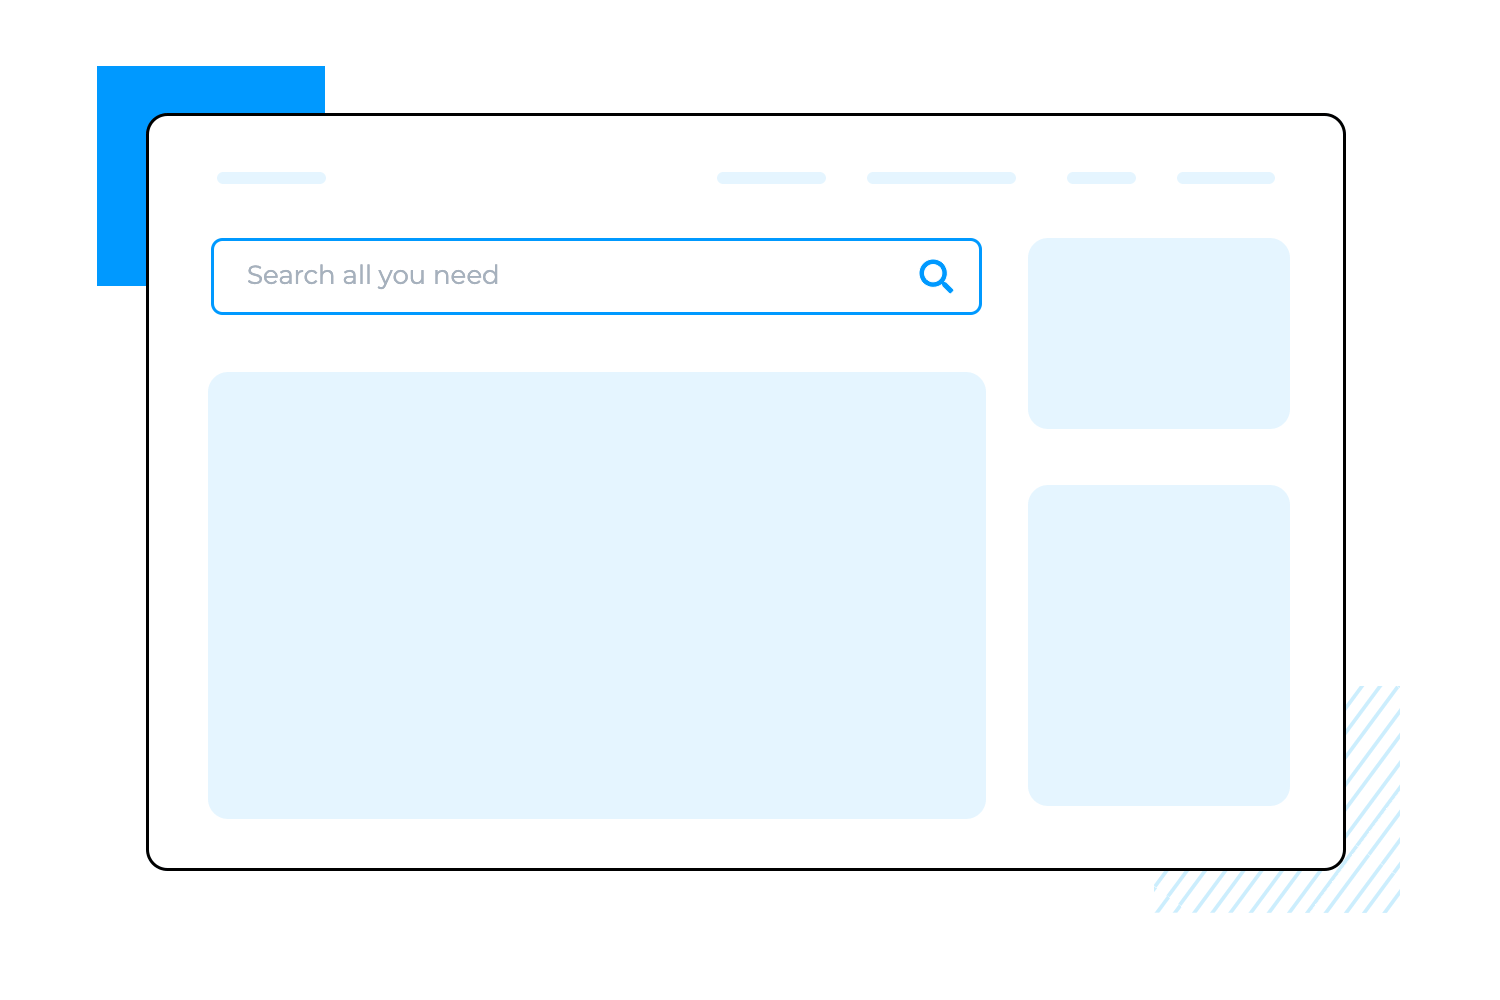 Search bar on a website interface